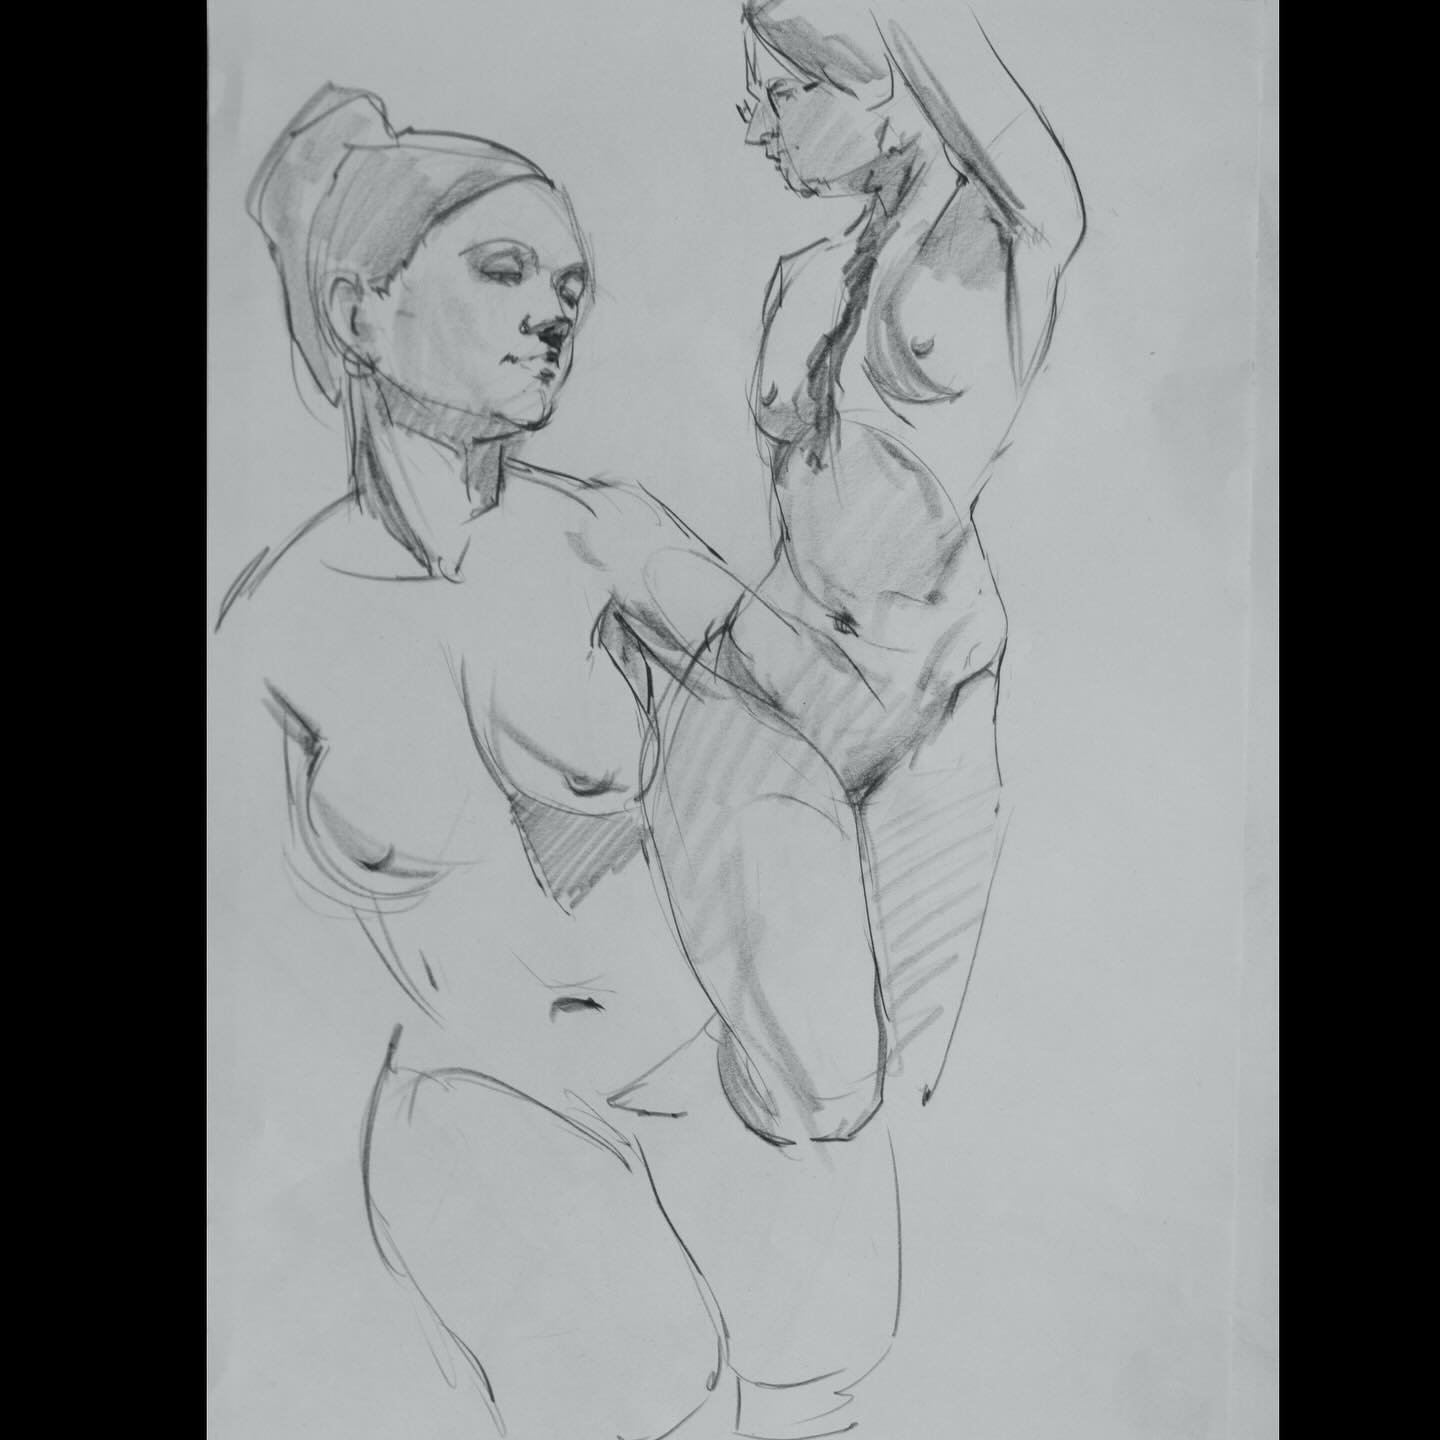 some quickdraws from @bayareamodelsguild gesture session with @ro.in.motion @mickeyfiguratively @tal_munrose @em.diane.er @desminadevil 
.
.
 #figuredrawing #figurativedrawing #figurativeart #lifedrawing #figurative #lifedrawings #drawing #draw #draw